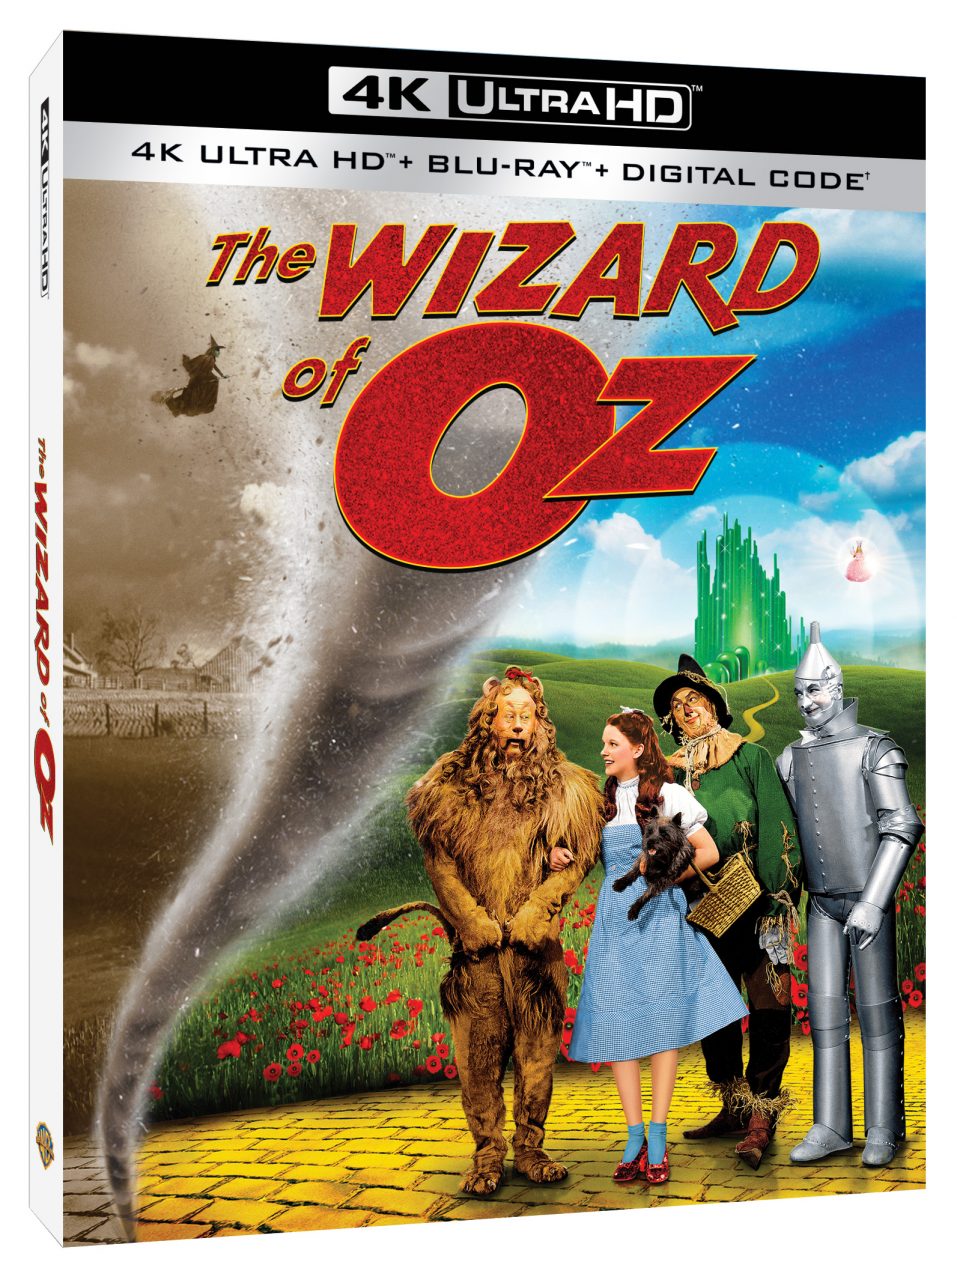 The Wizard Of Oz 4K Ultra HD Combo Pack cover (Warner Bros. Home Entertainment)